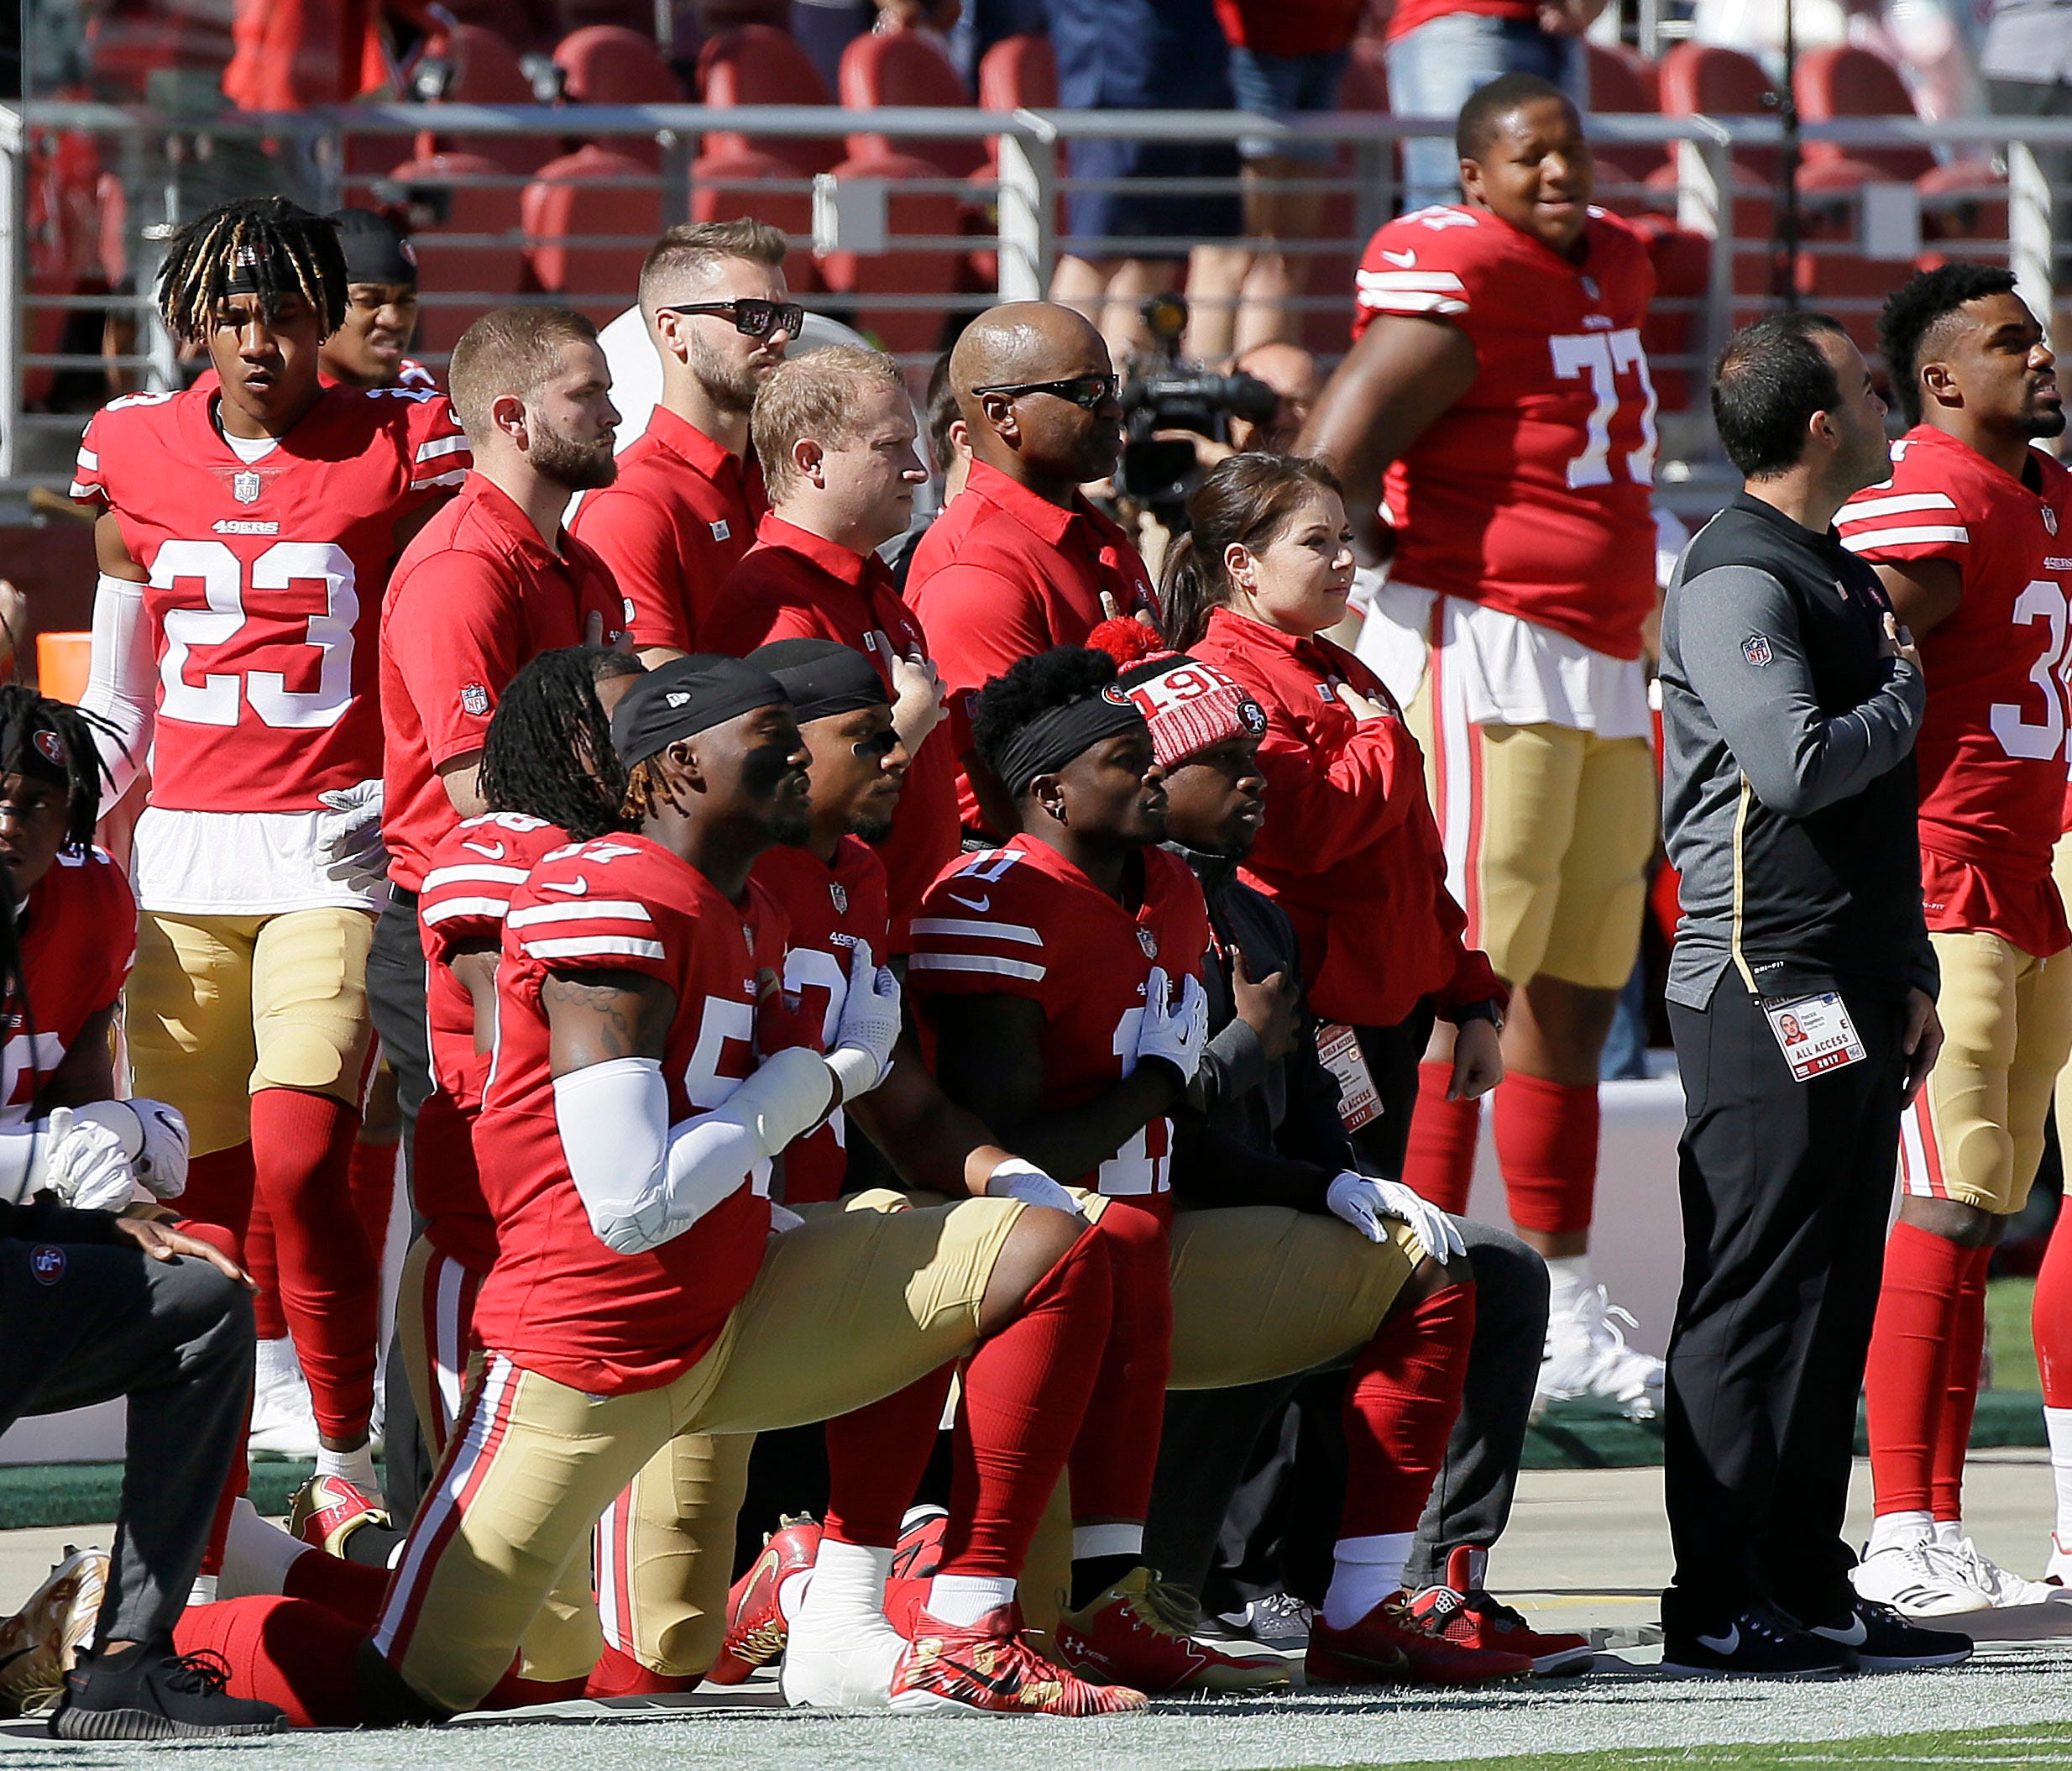 San Francisco 49ers players kneel during the performance of the national anthem before an NFL football game between the 49ers and the Dallas Cowboys in Santa Clara, Calif., Sunday, Oct. 22, 2017.